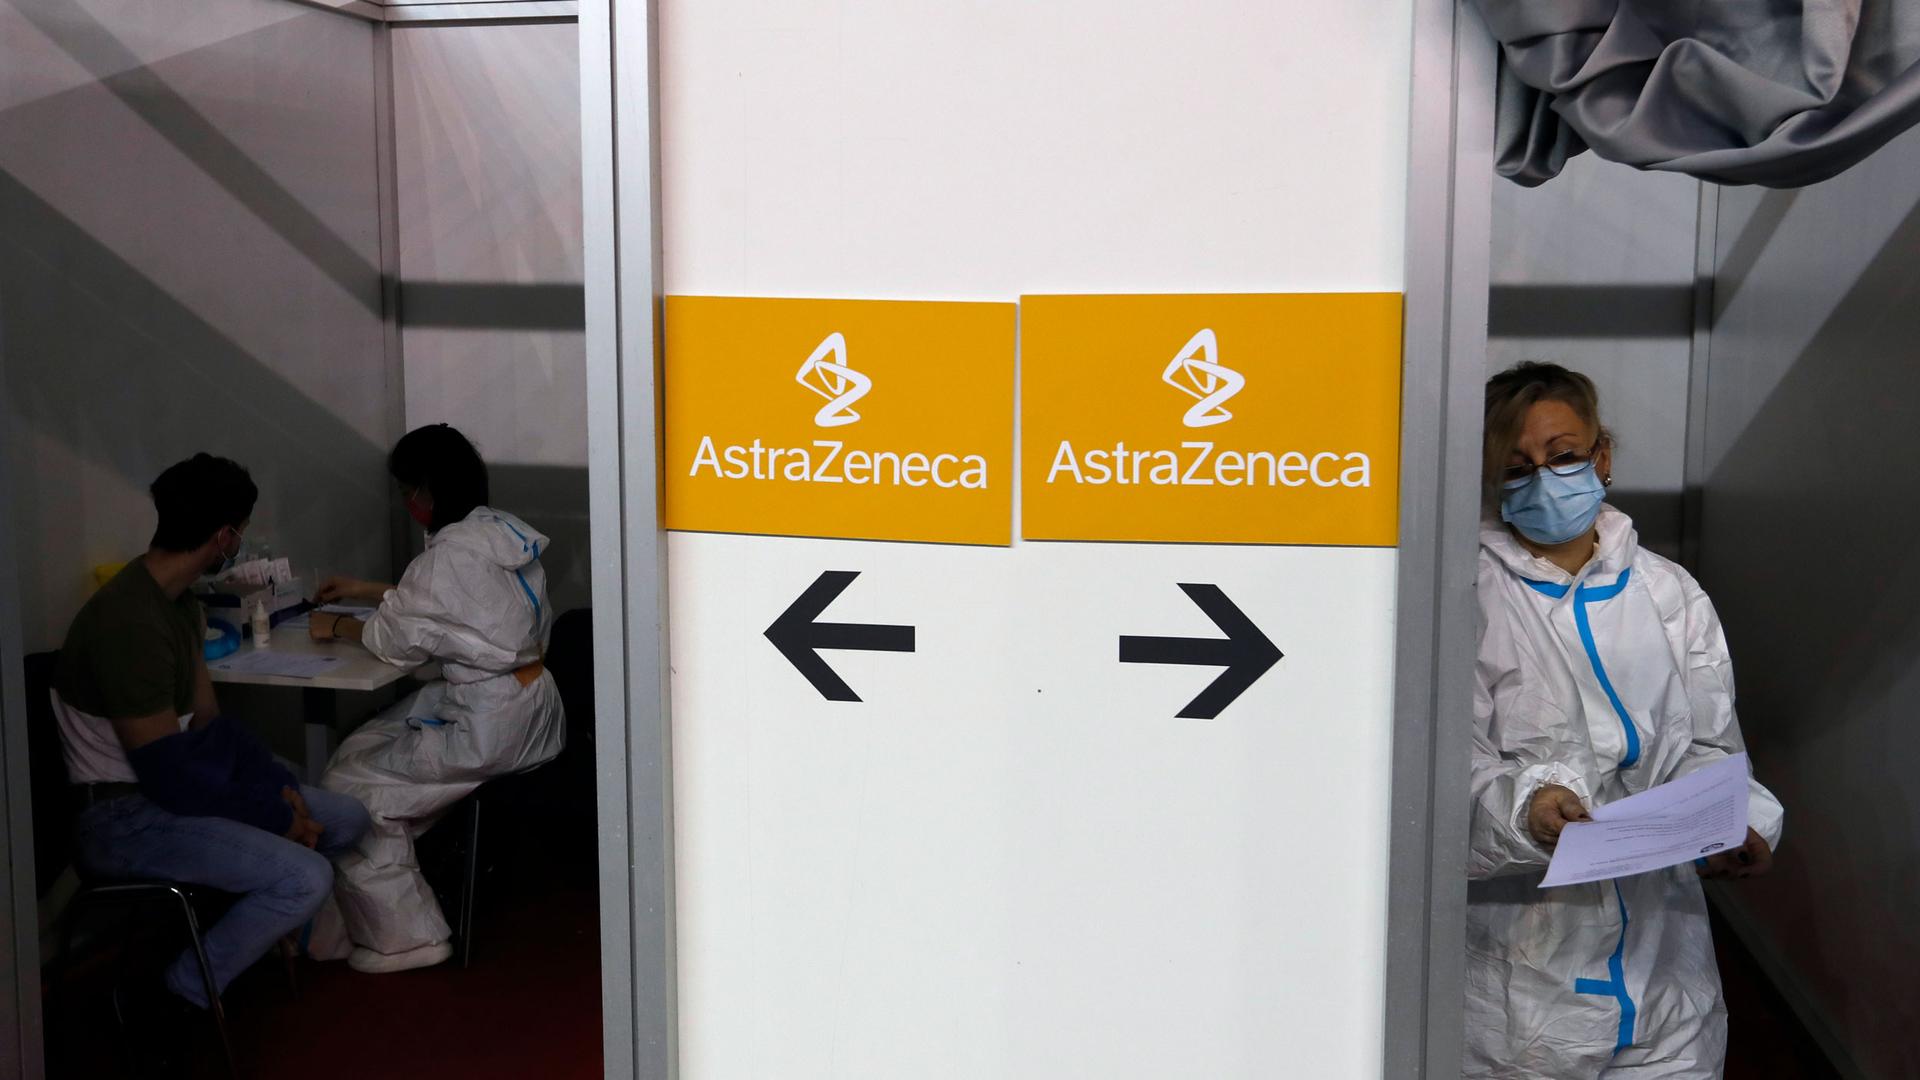 Medical professionals are shown on either side of a wall that has signs for the AstraZeneca vaccine posted on it.